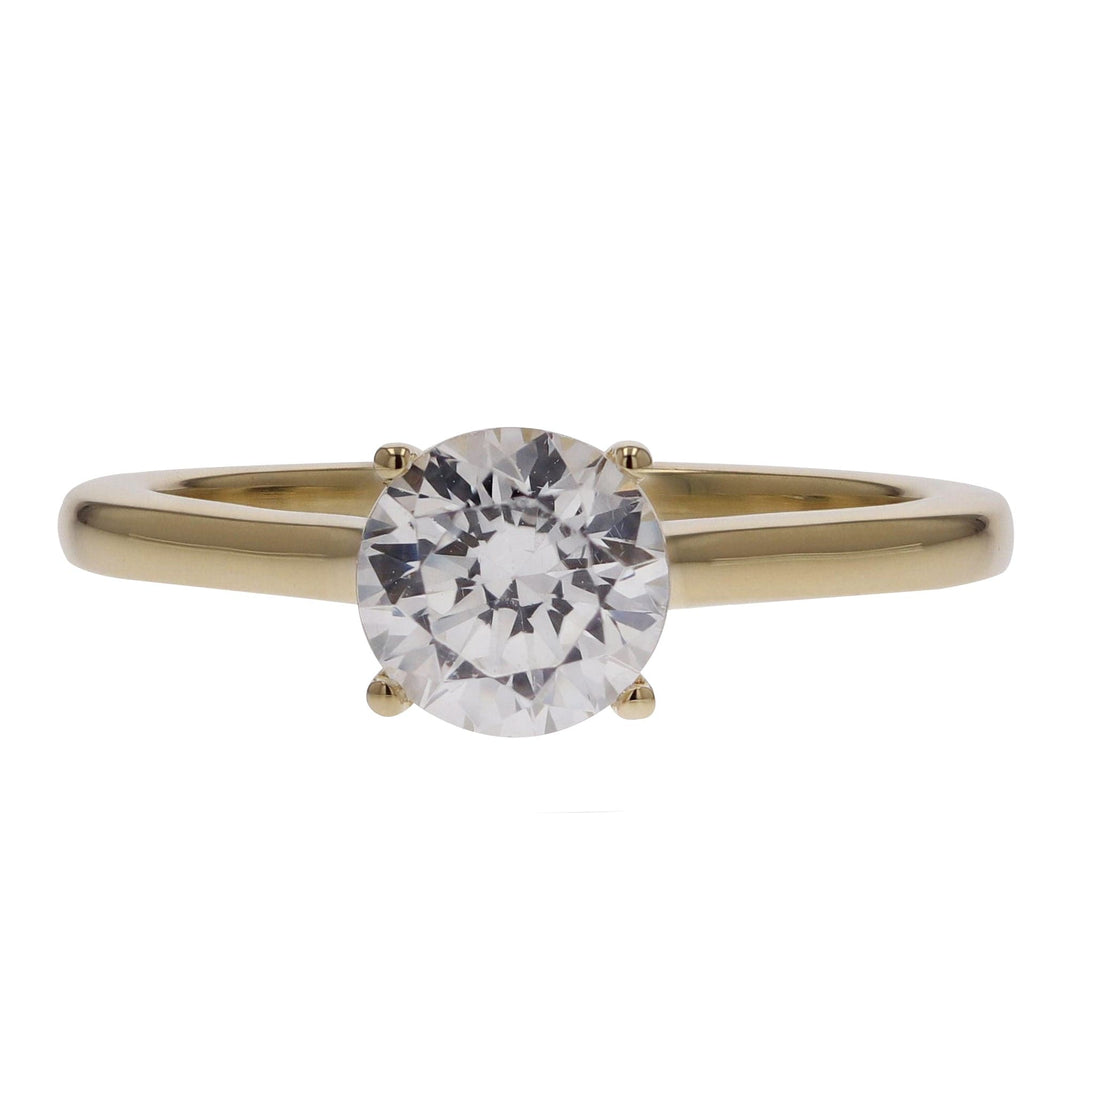 Skeie's Bridal Solitaire Semi-Mount Engagement Ring in Yellow Gold - Skeie's Jewelers